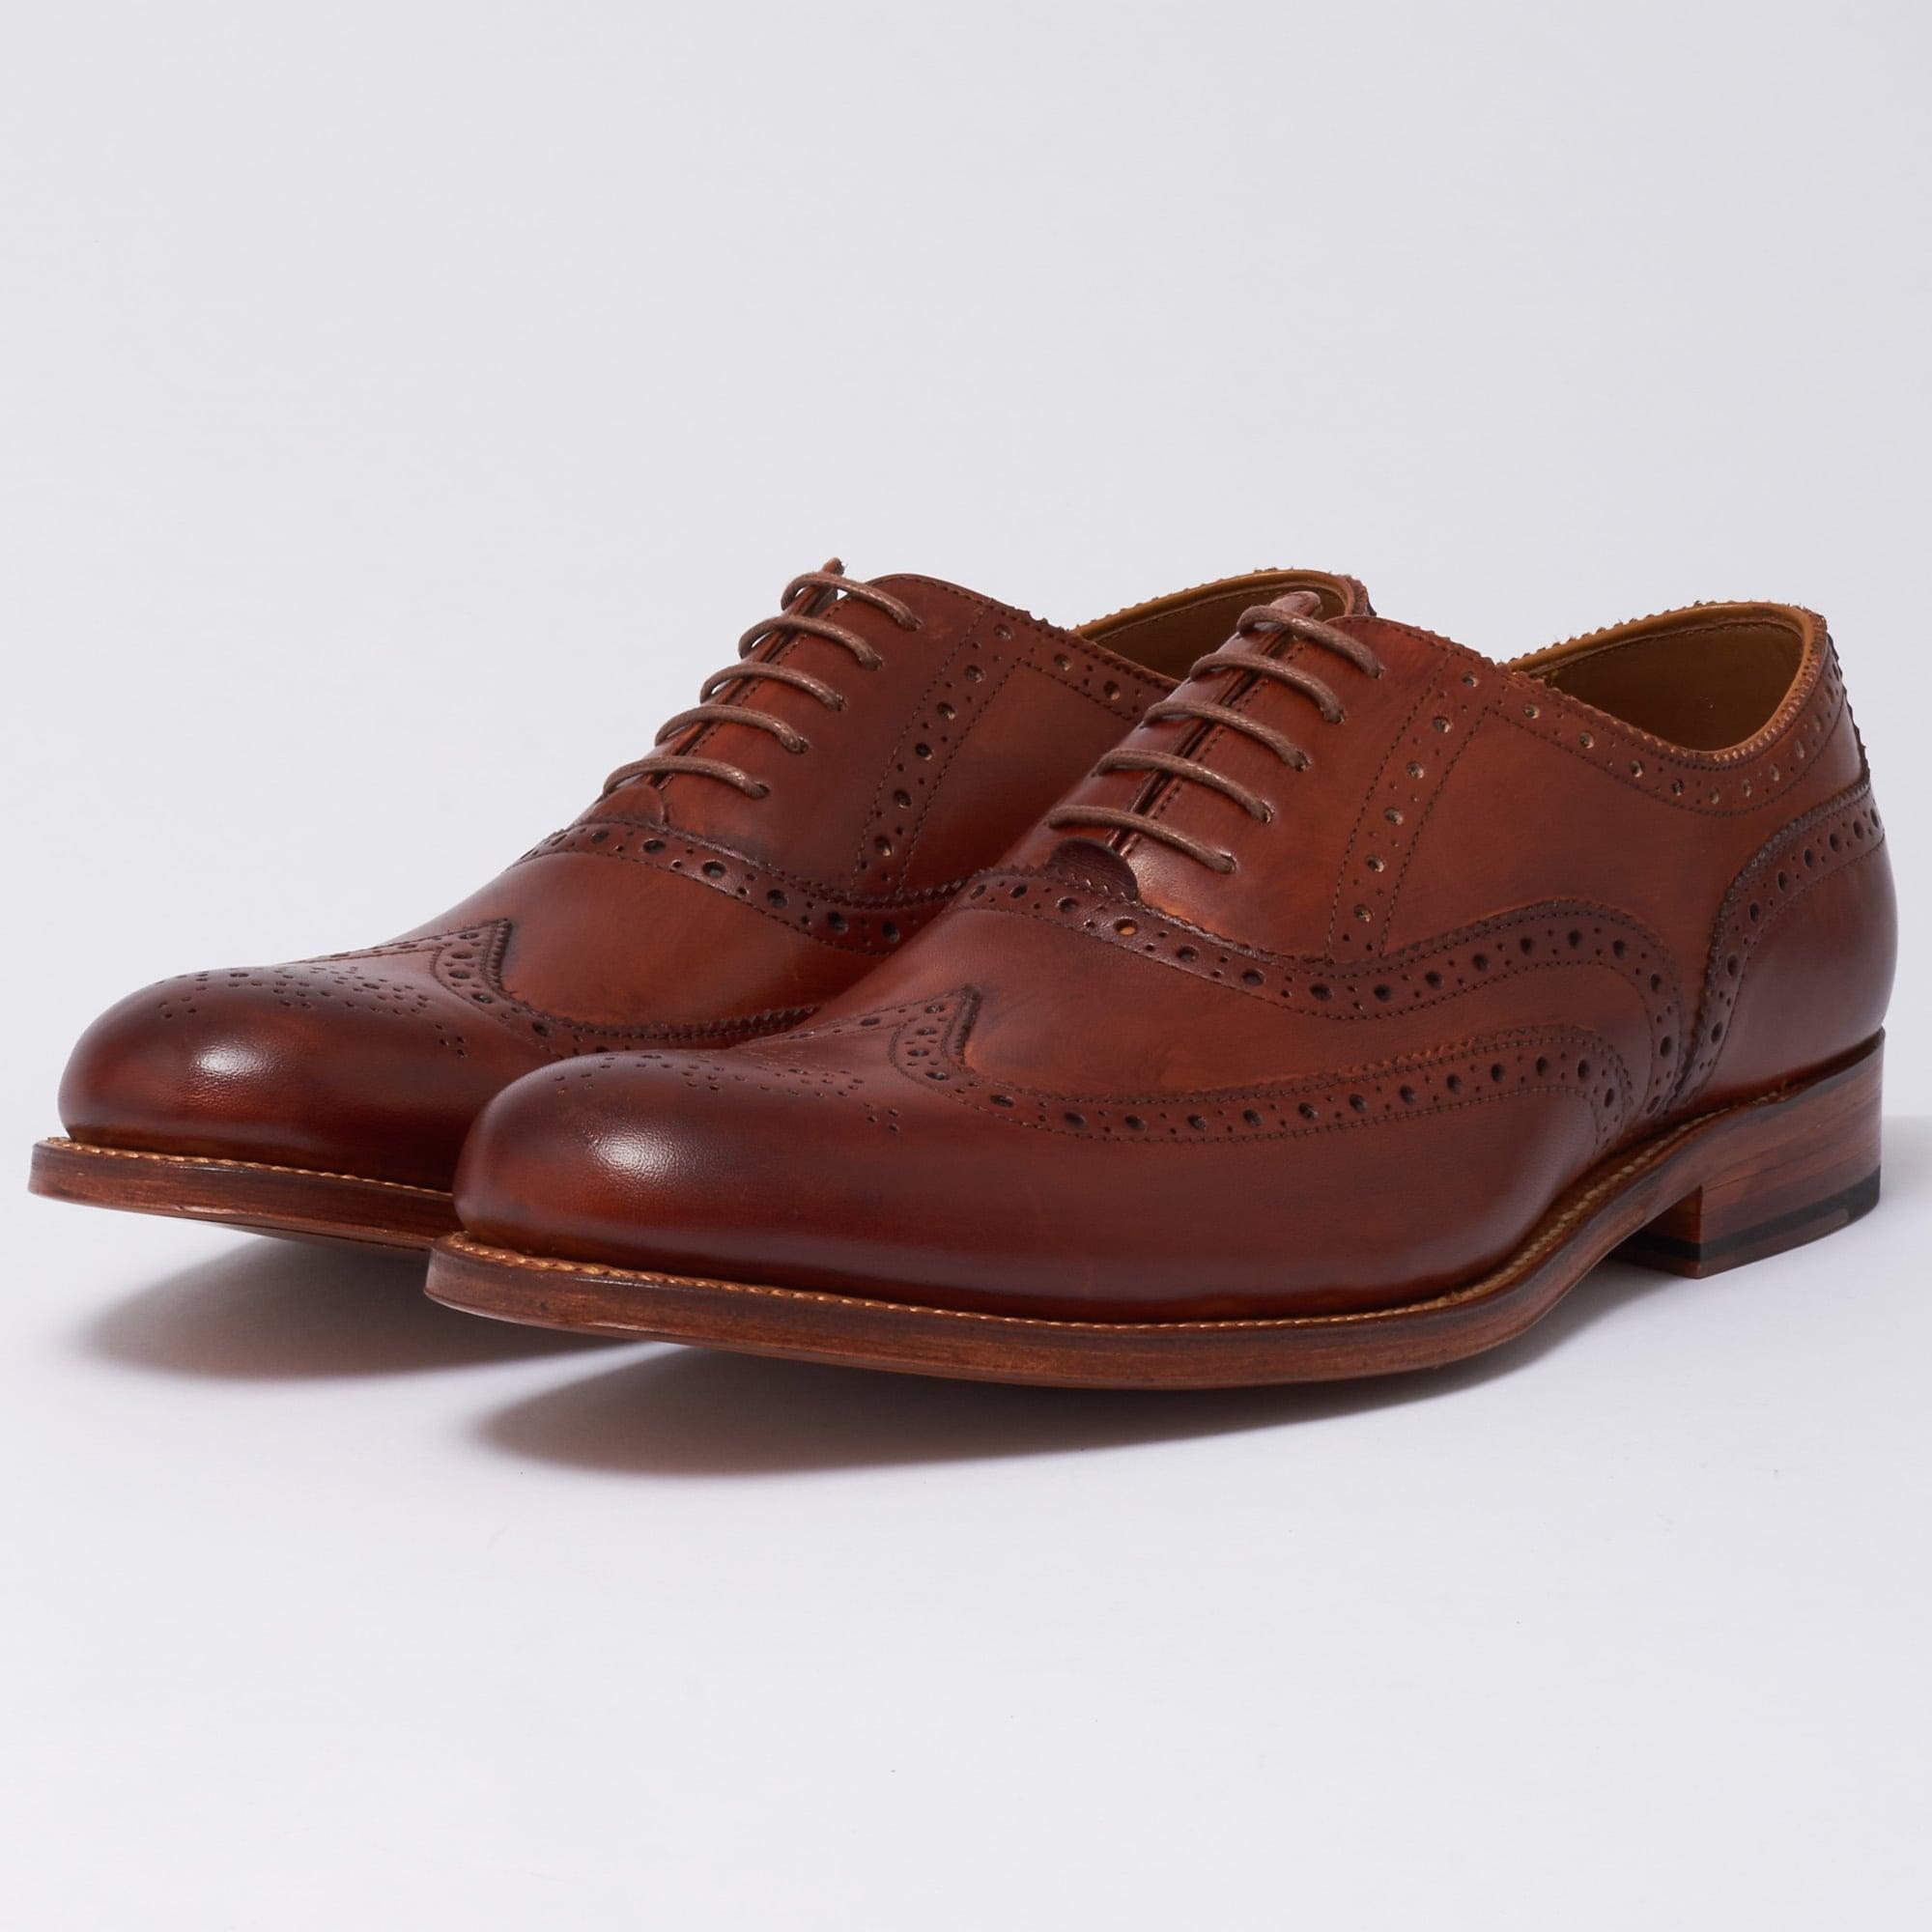 Grenson Leather Dylan Oxford Brogue Shoes in Tan (Brown) for Men - Lyst